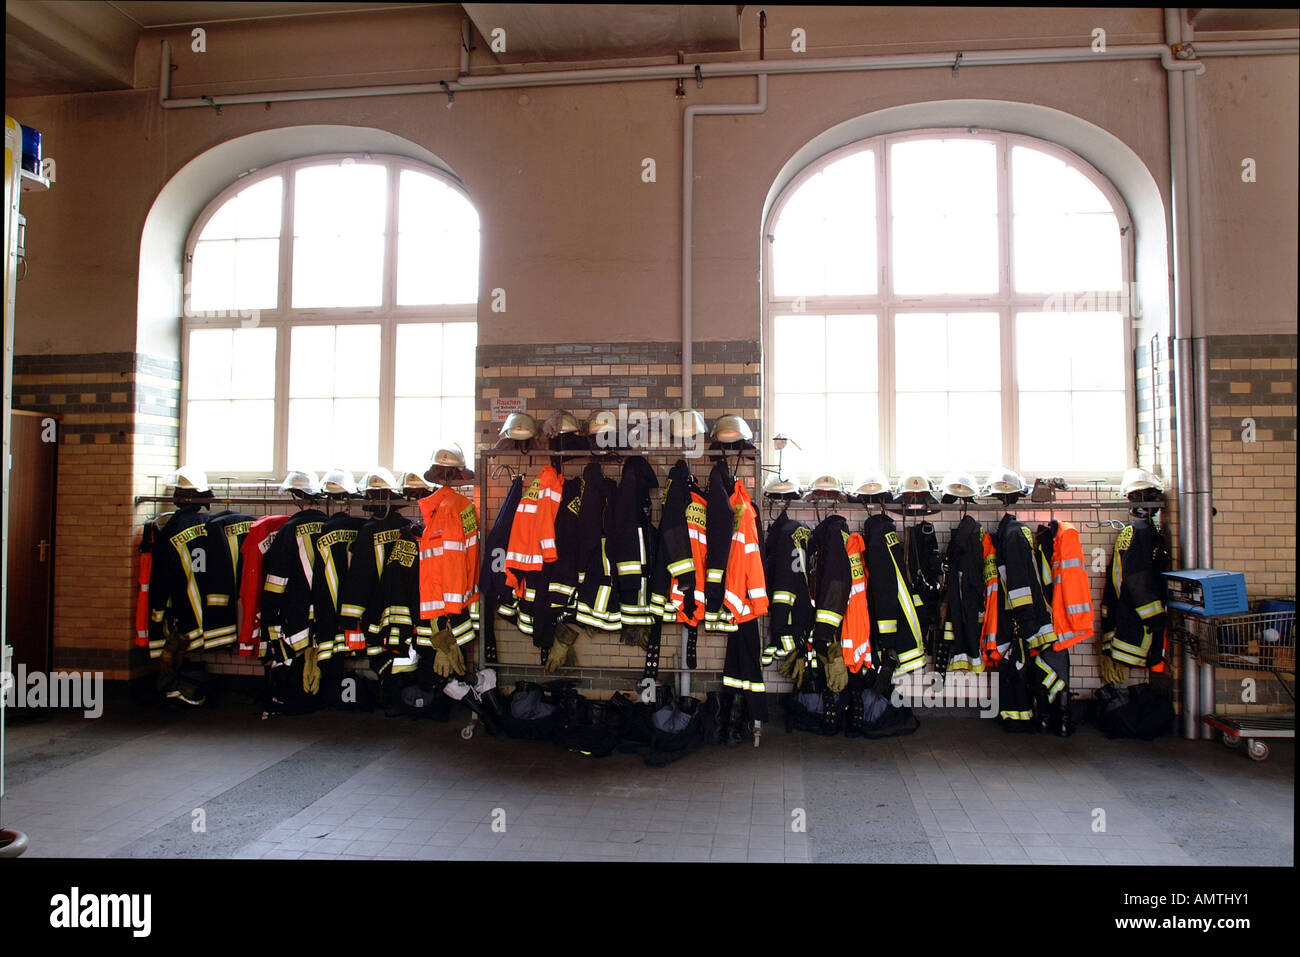 Feuerwehr outfits in front of windows Stock Photo